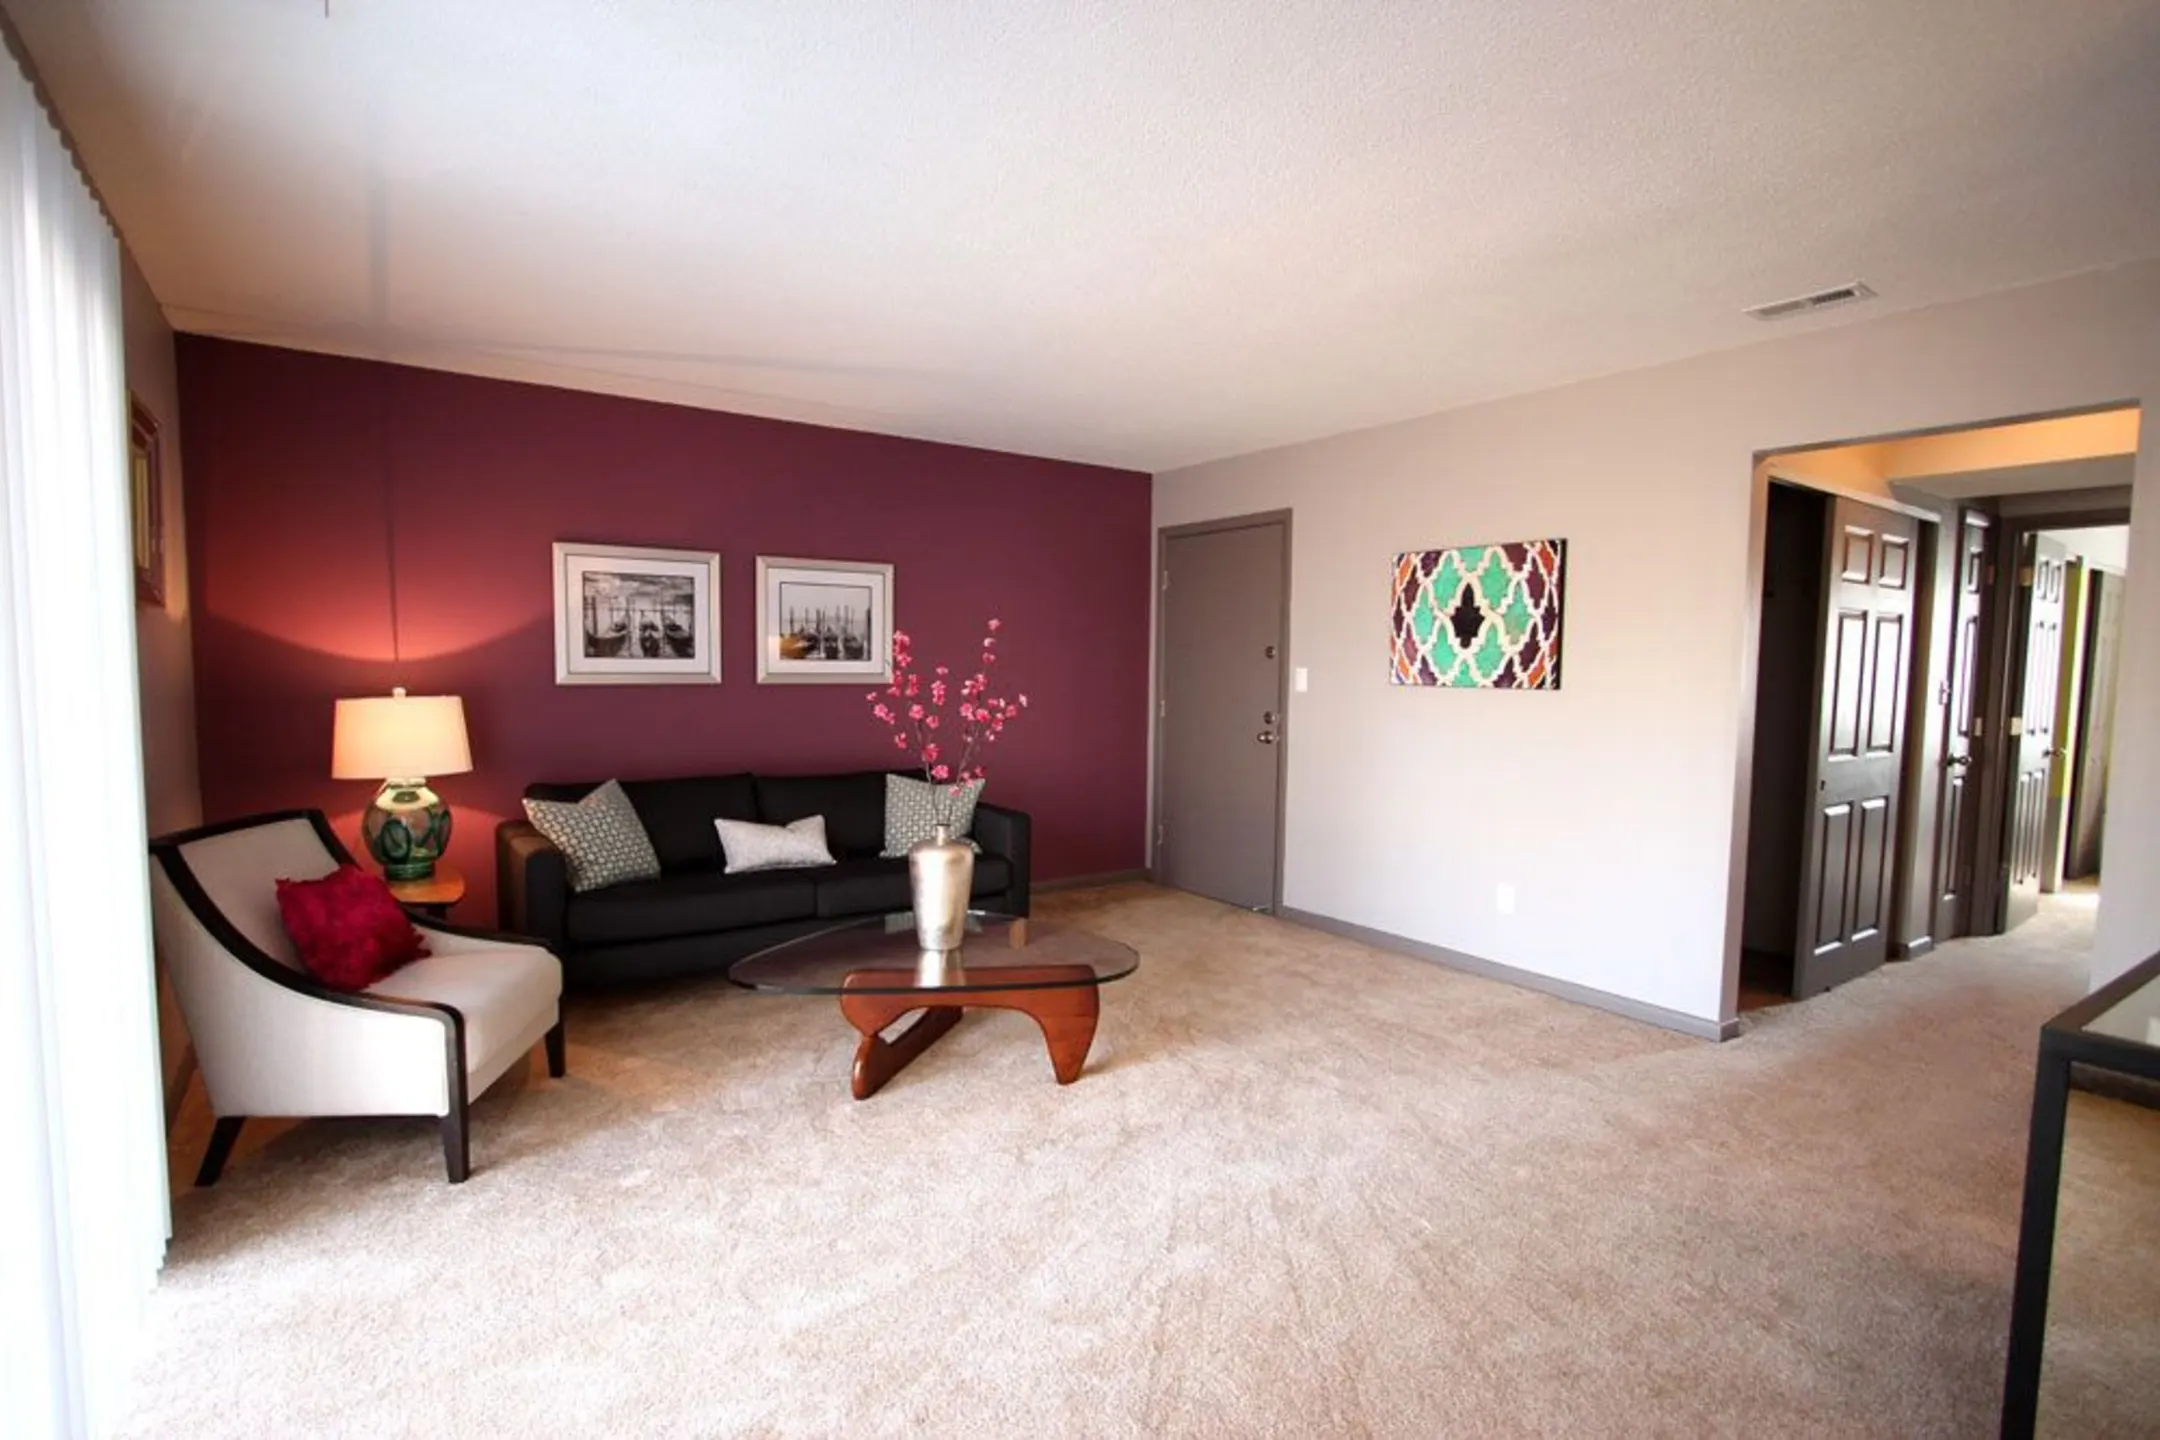 Living Room - Landmark Apartments & Townhomes - Indianapolis, IN